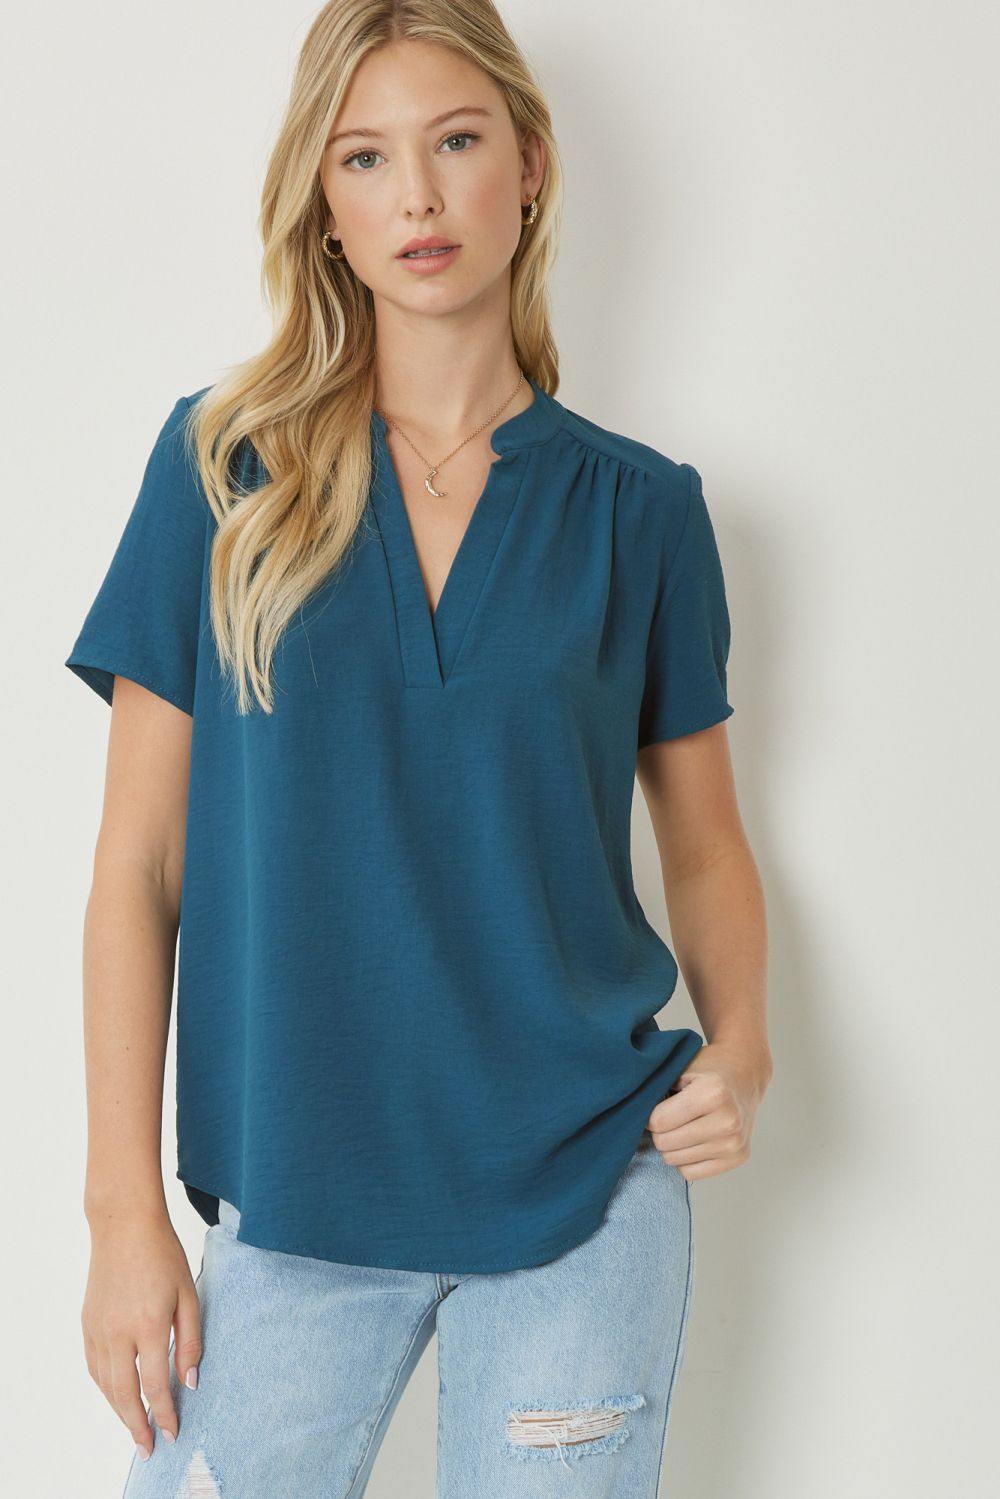 entro brand basic colorful tops Mock Collar Pleat Detailed teal